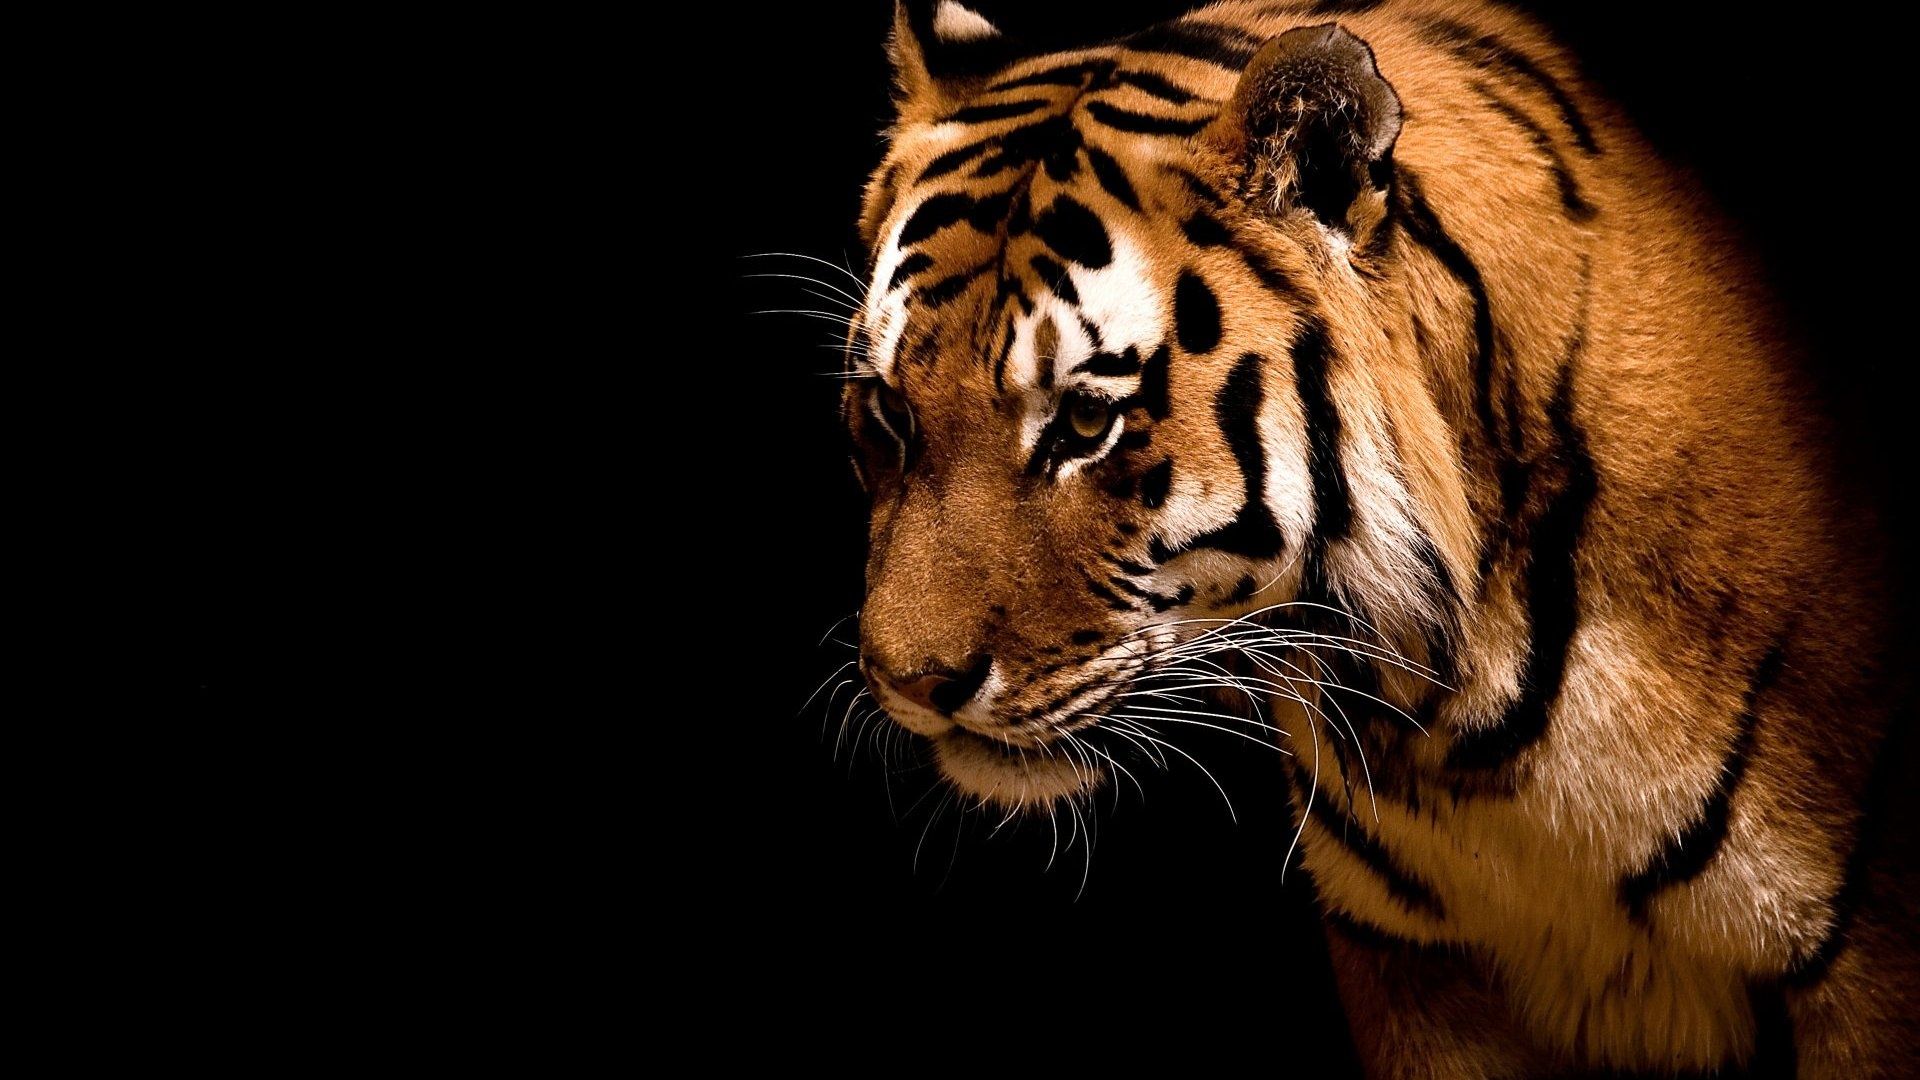 1063 Tiger HD Wallpapers Backgrounds - Wallpaper Abyss